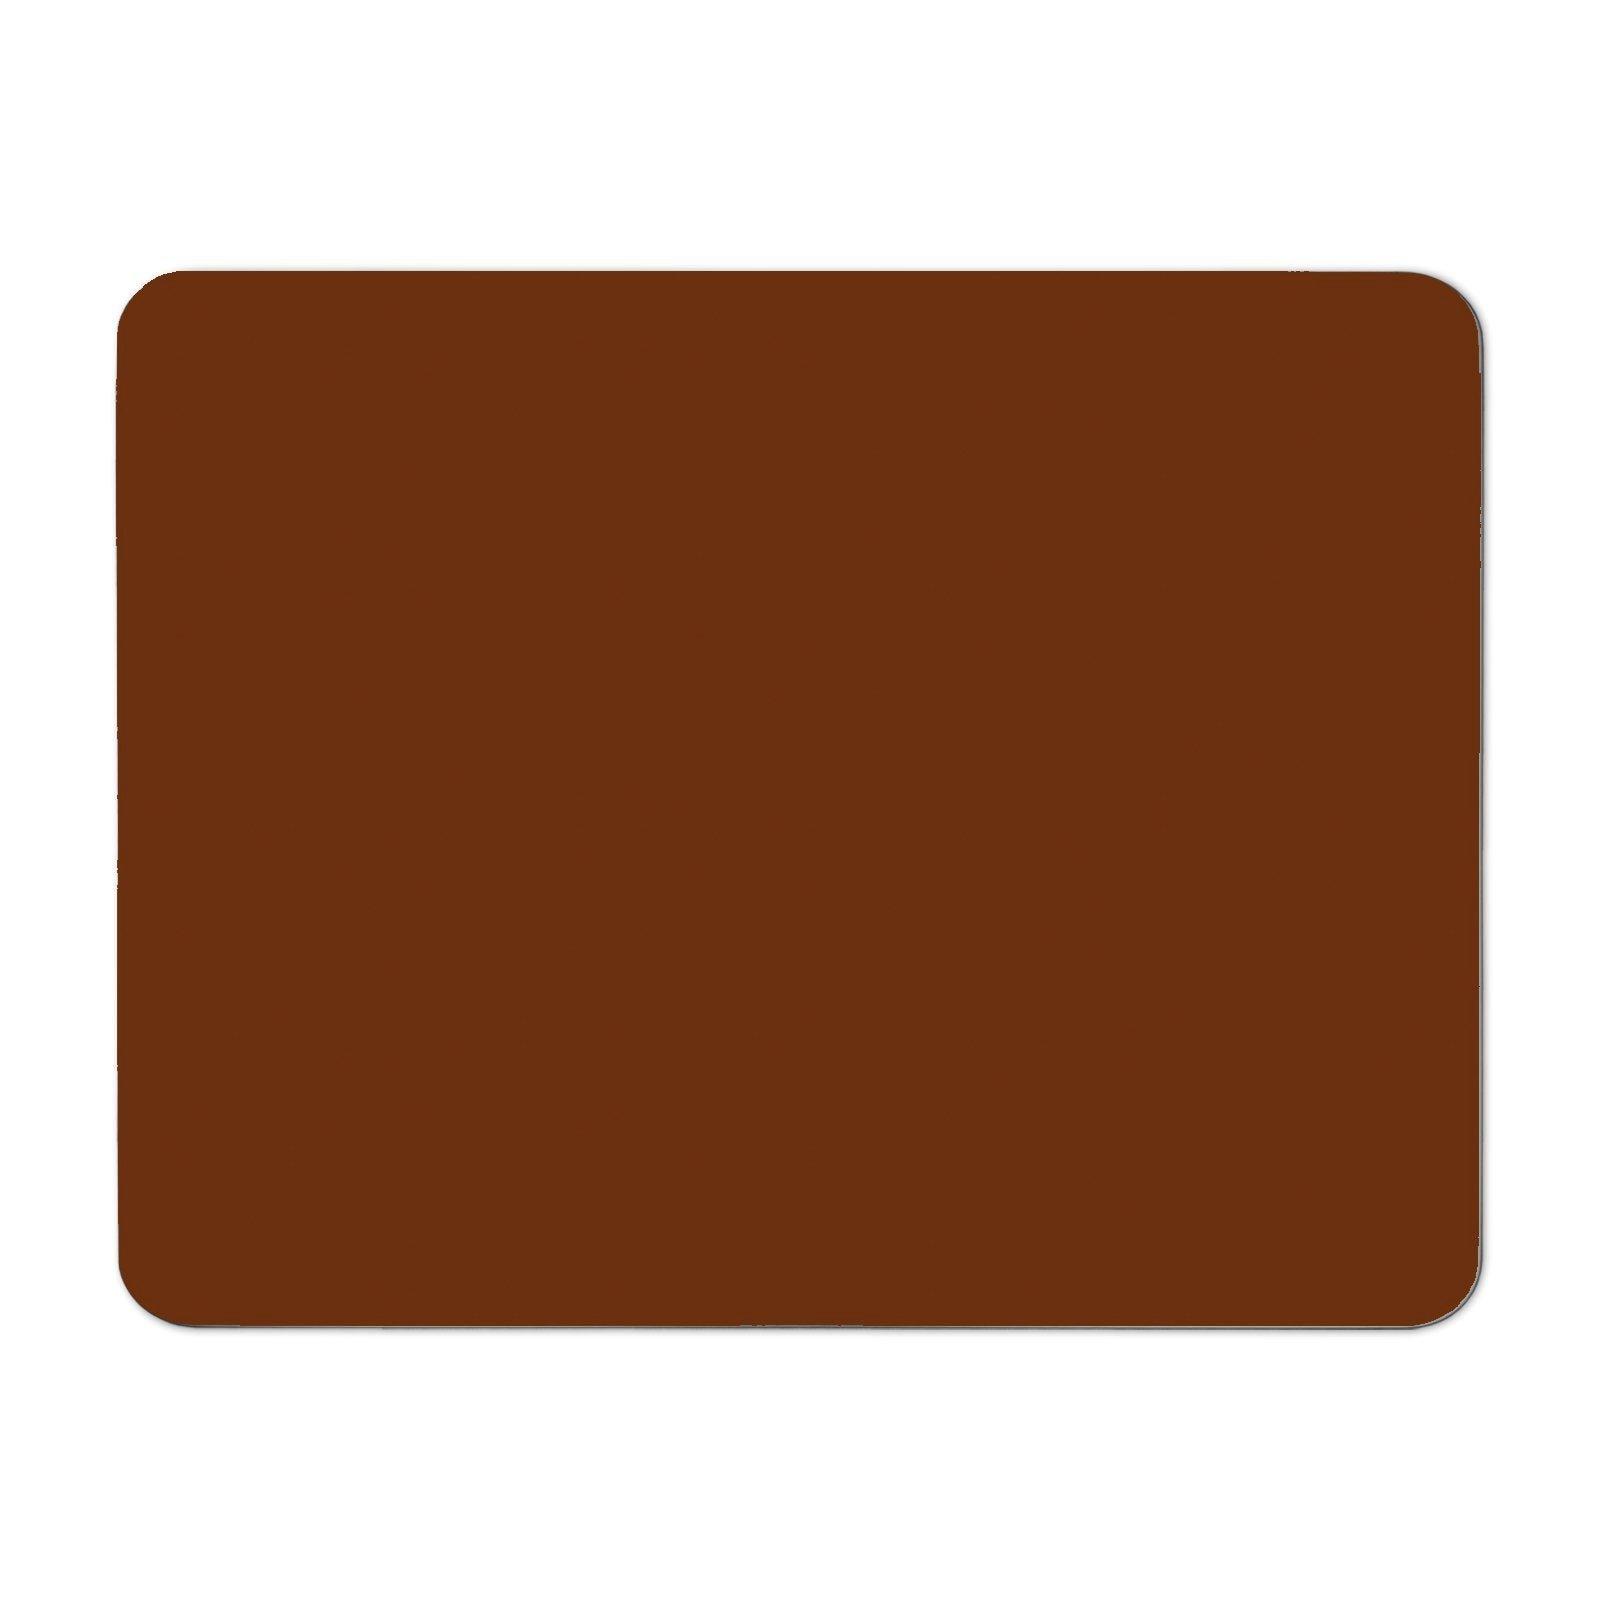 Chocolate Brown Placemats